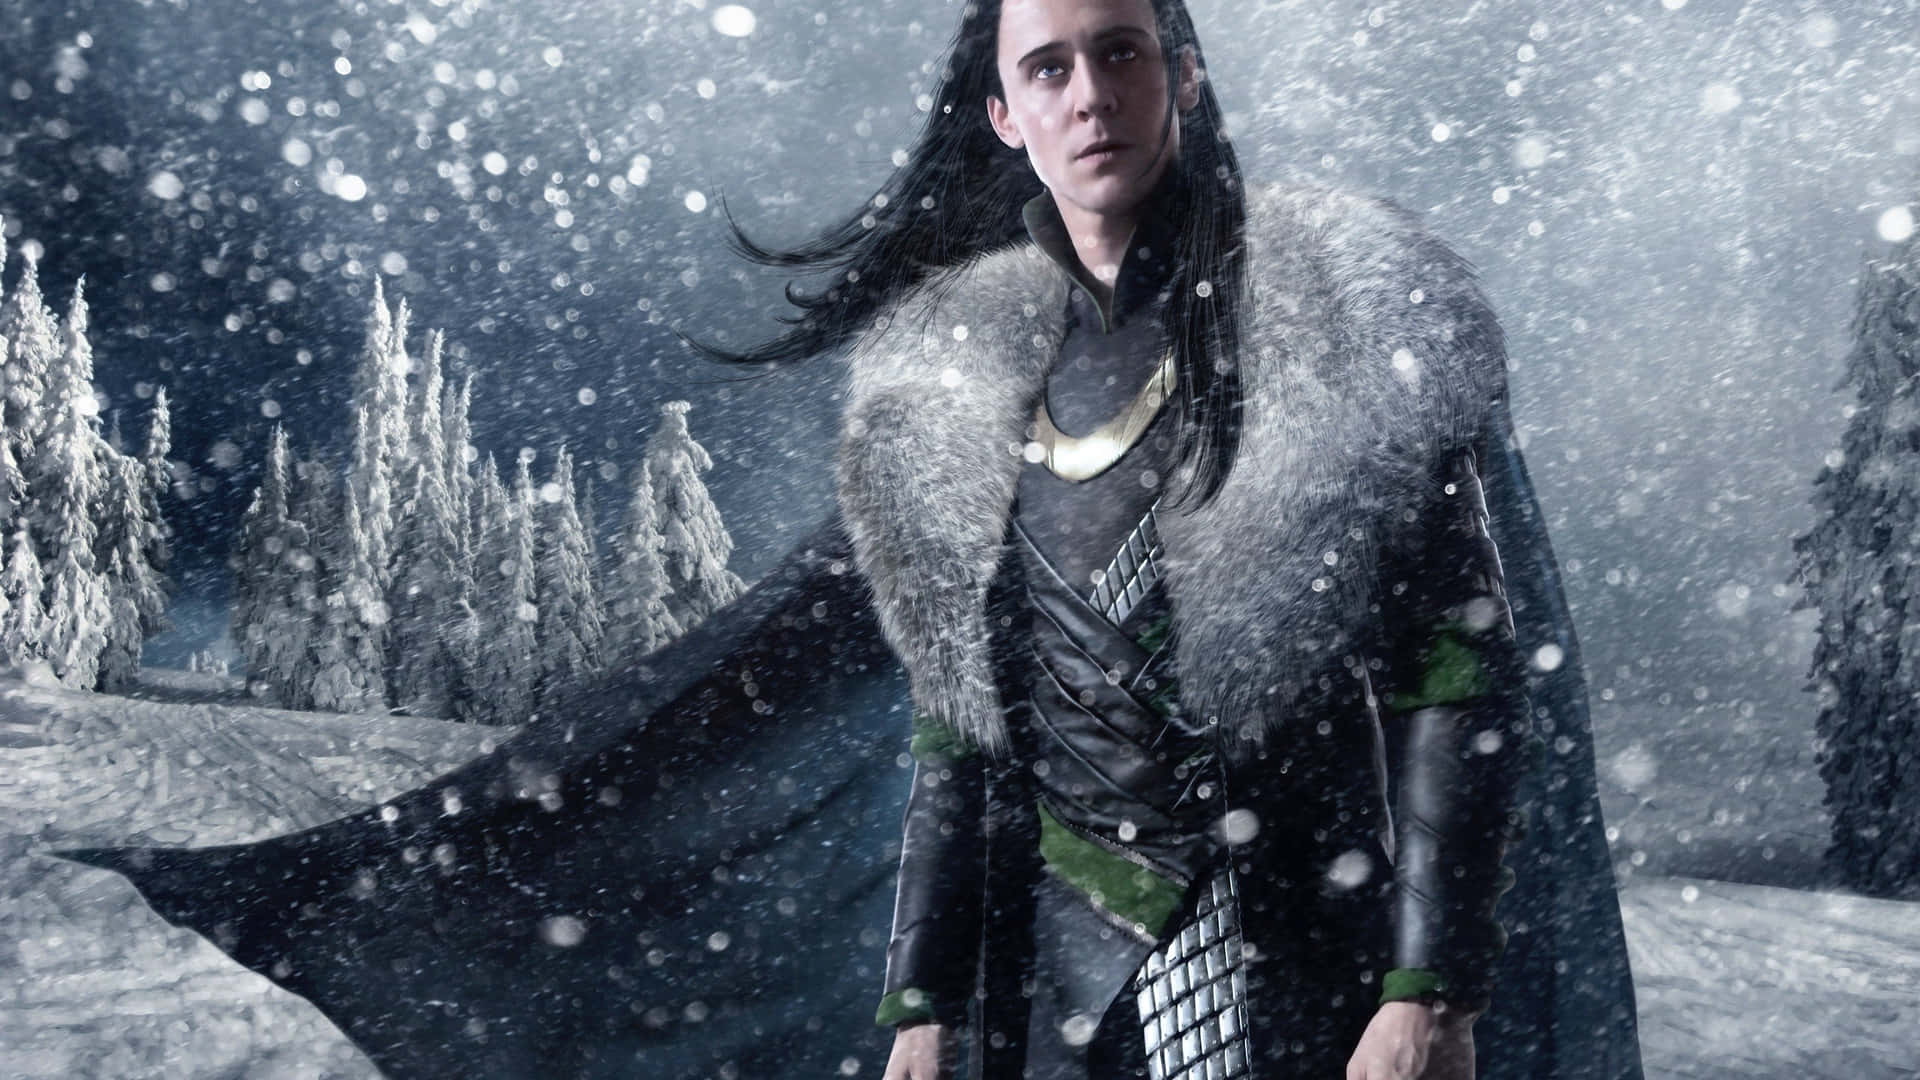 Caption: The Cunning and Mischievous Loki